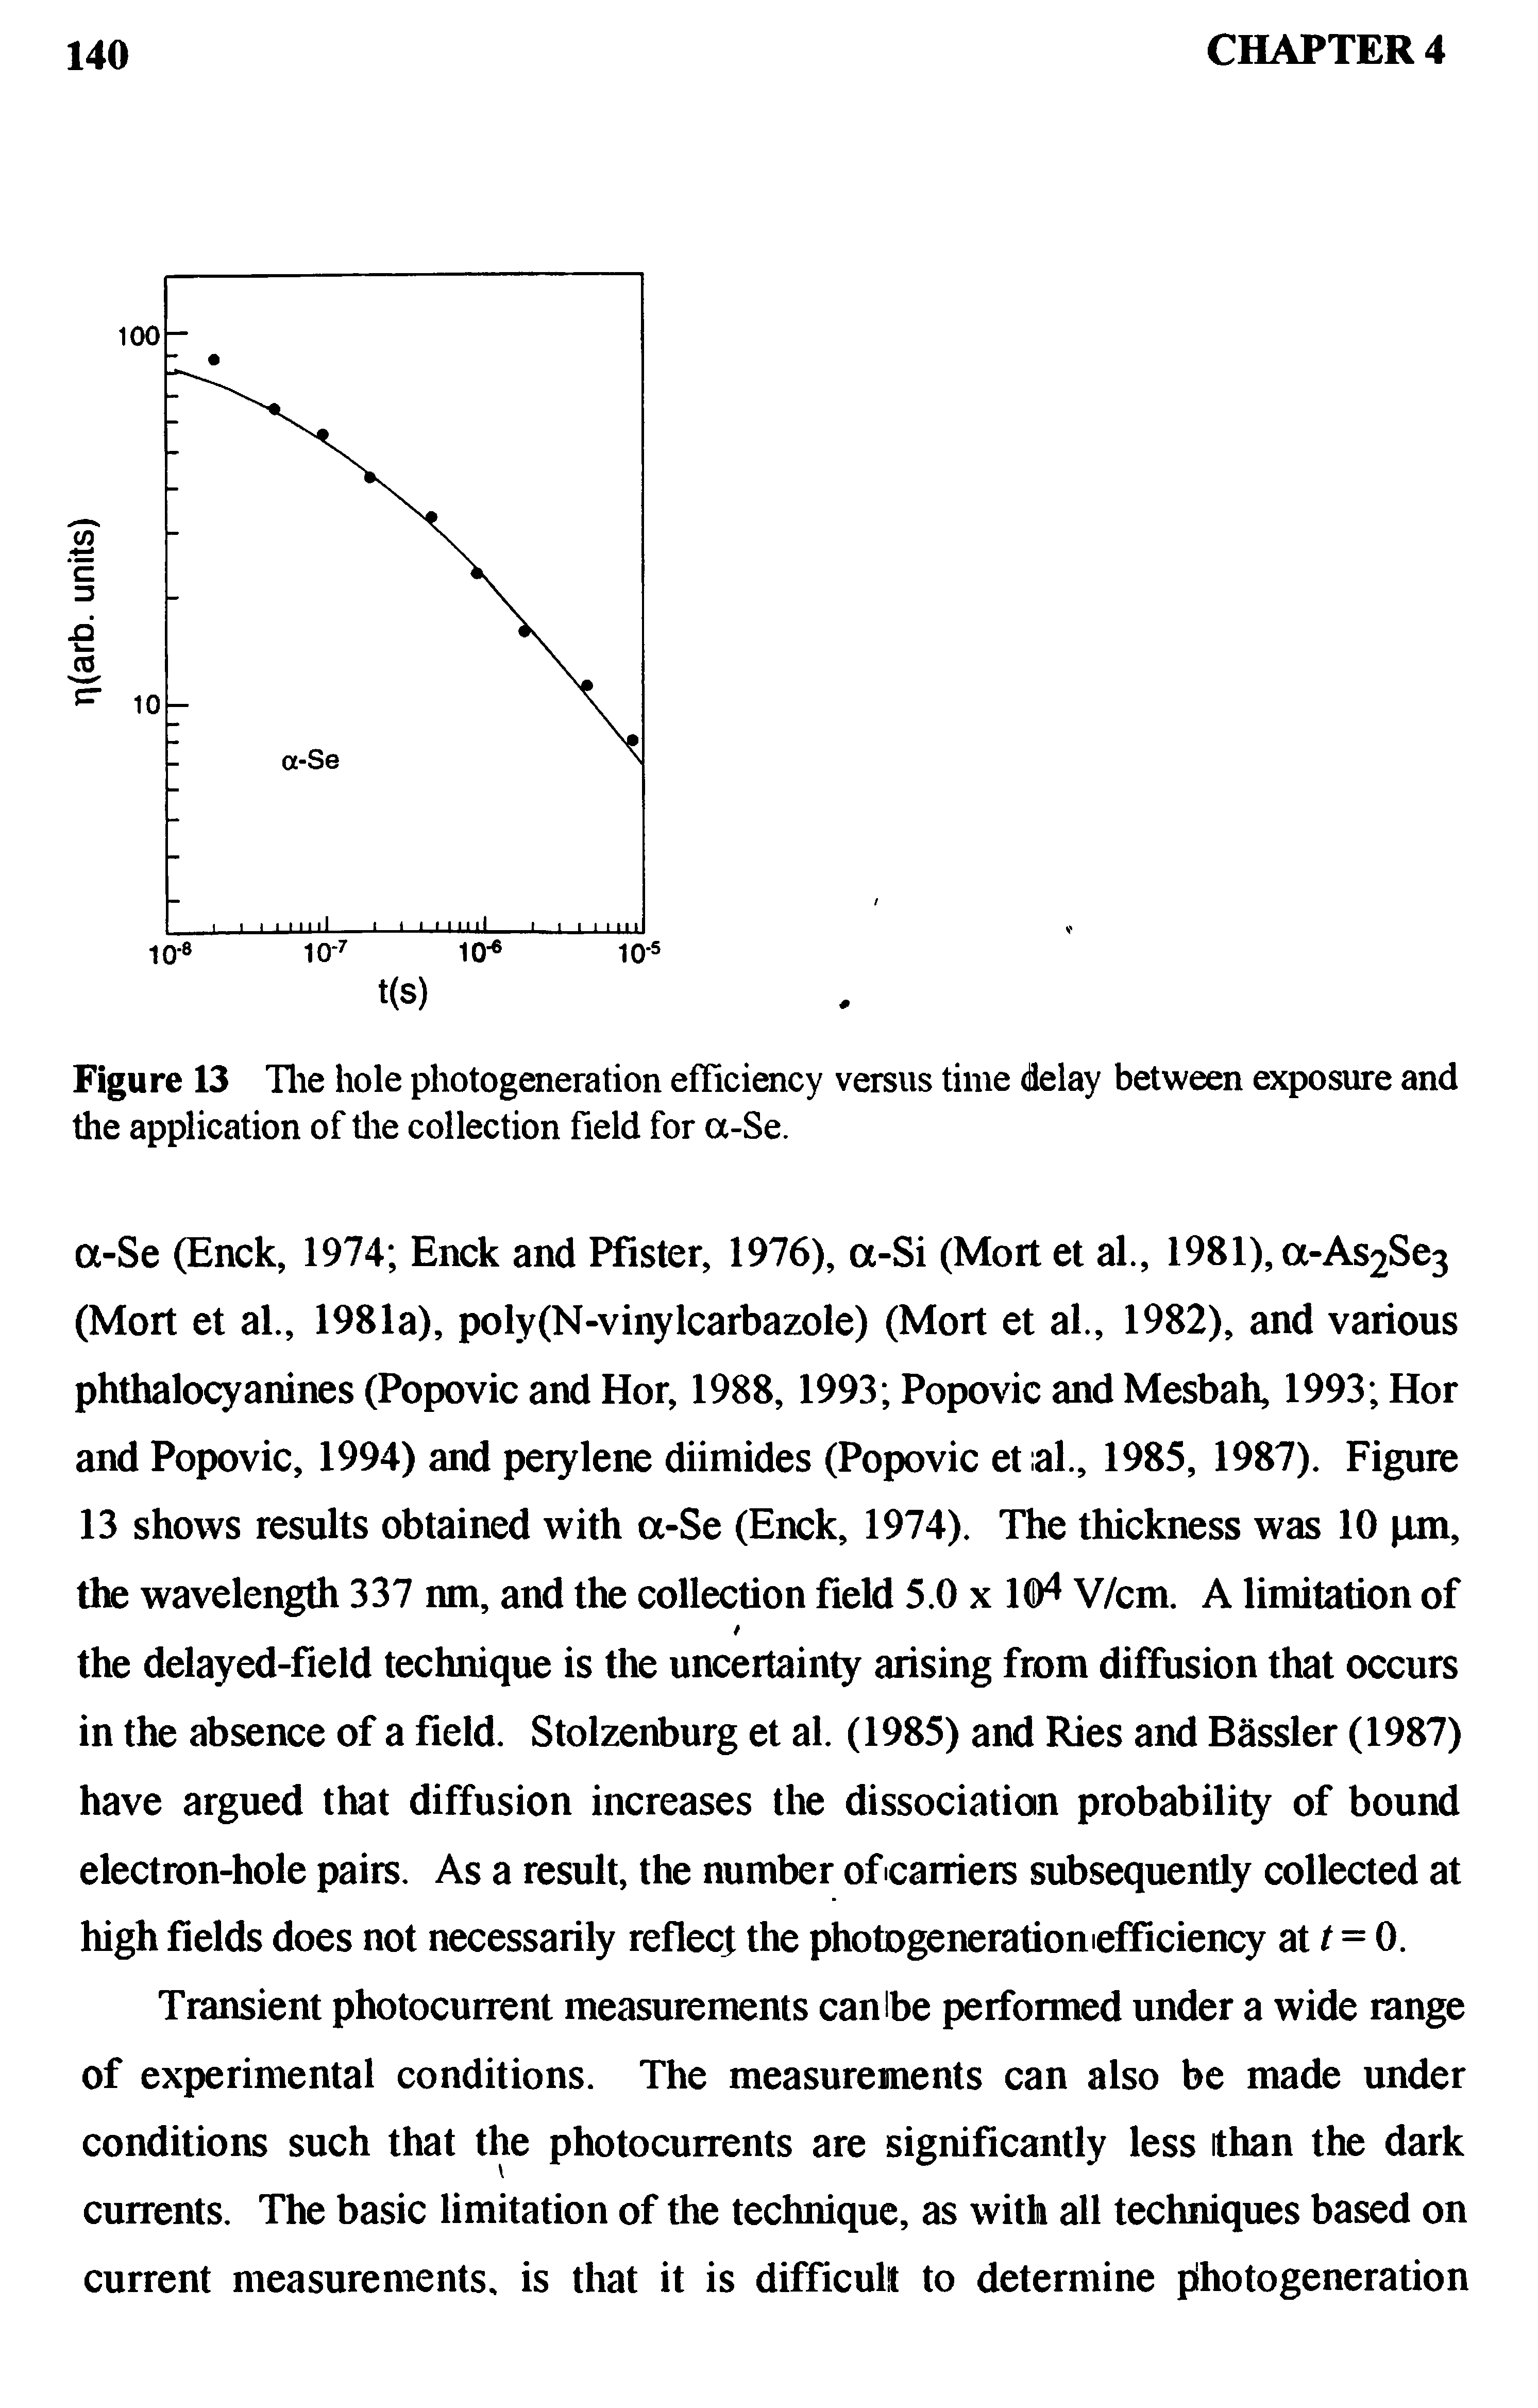 Figure 13 The hole photogeneration efficiency versus time delay between exposure and the application of the collection field for a-Se.